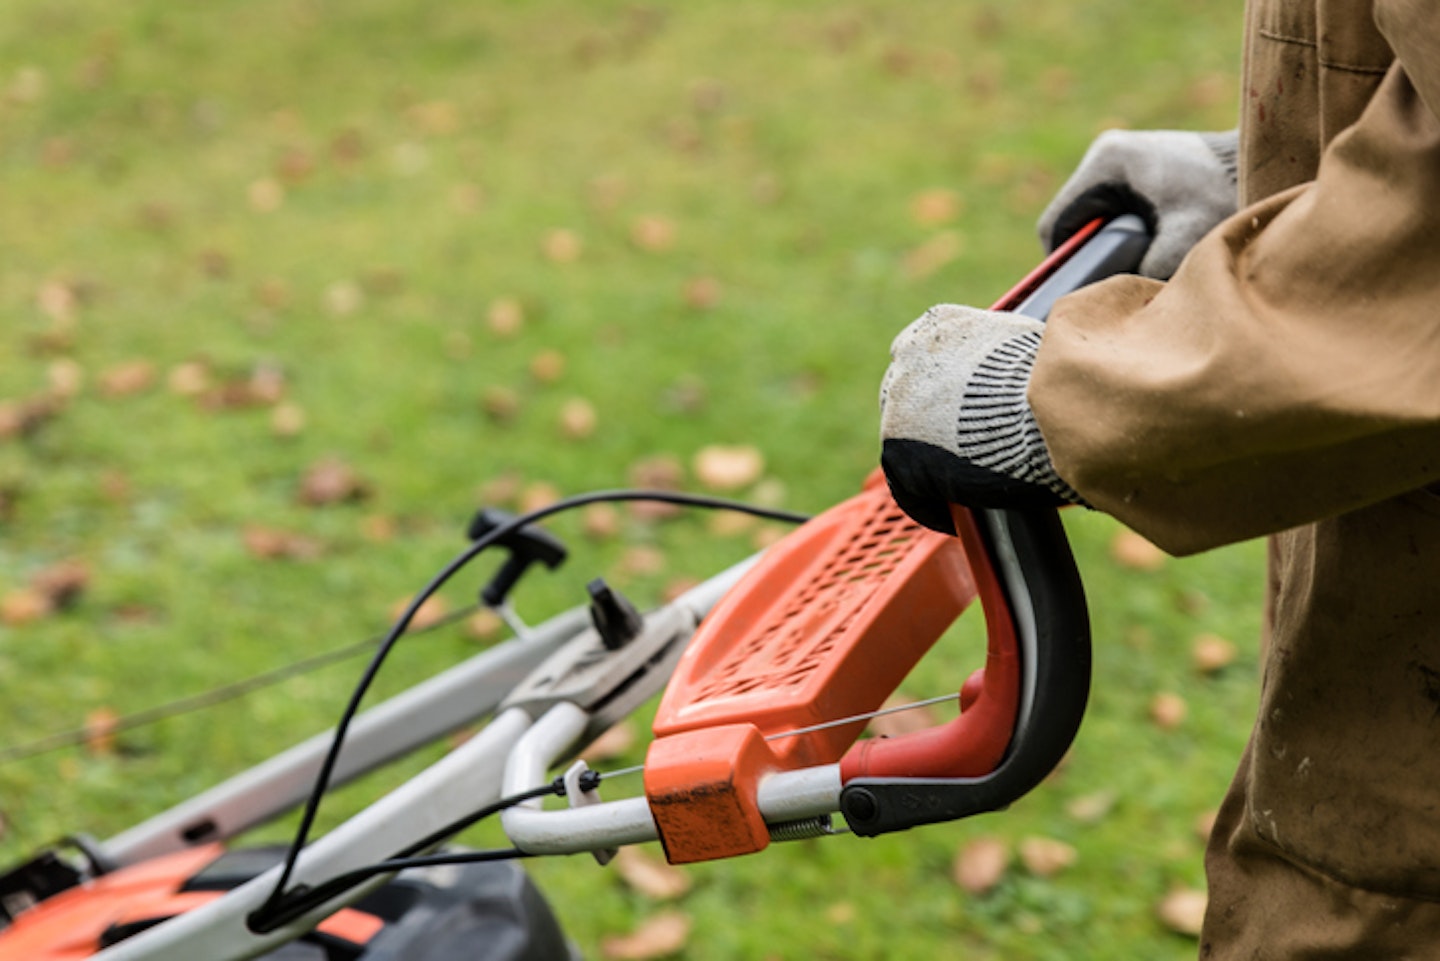 Close-up view of an unrecognizable gardener with gloves mowing the grass with a lawnmower.